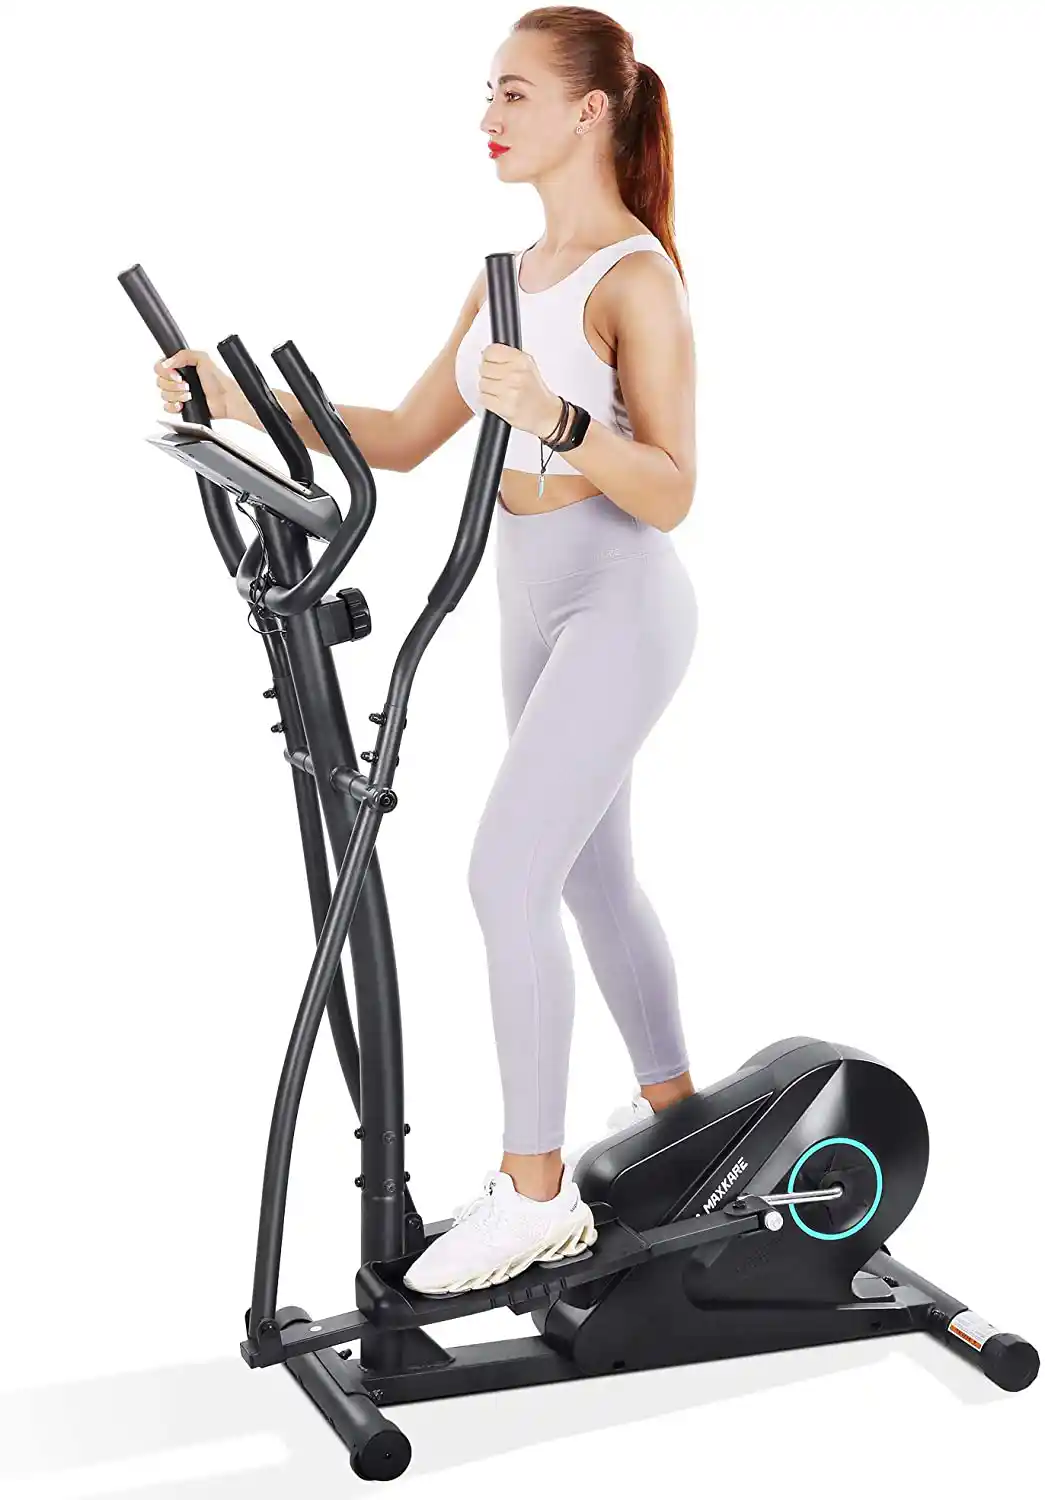 MAxKare elliptical exercise machine for small apartment